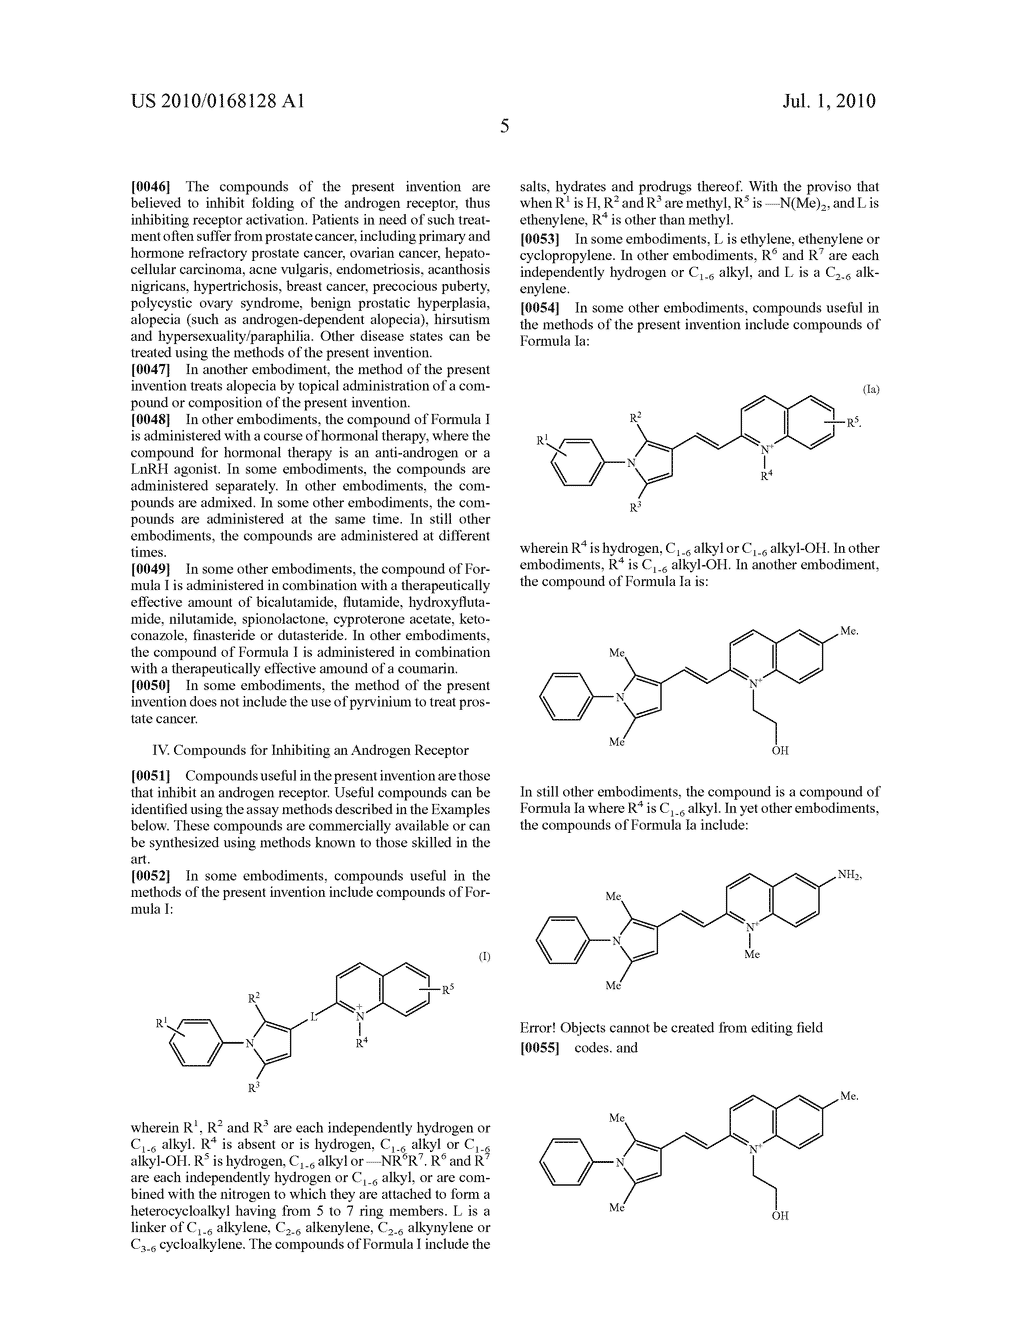 SMALL-MOLECULE INHIBITORS OF THE ANDROGEN RECEPTOR - diagram, schematic, and image 21